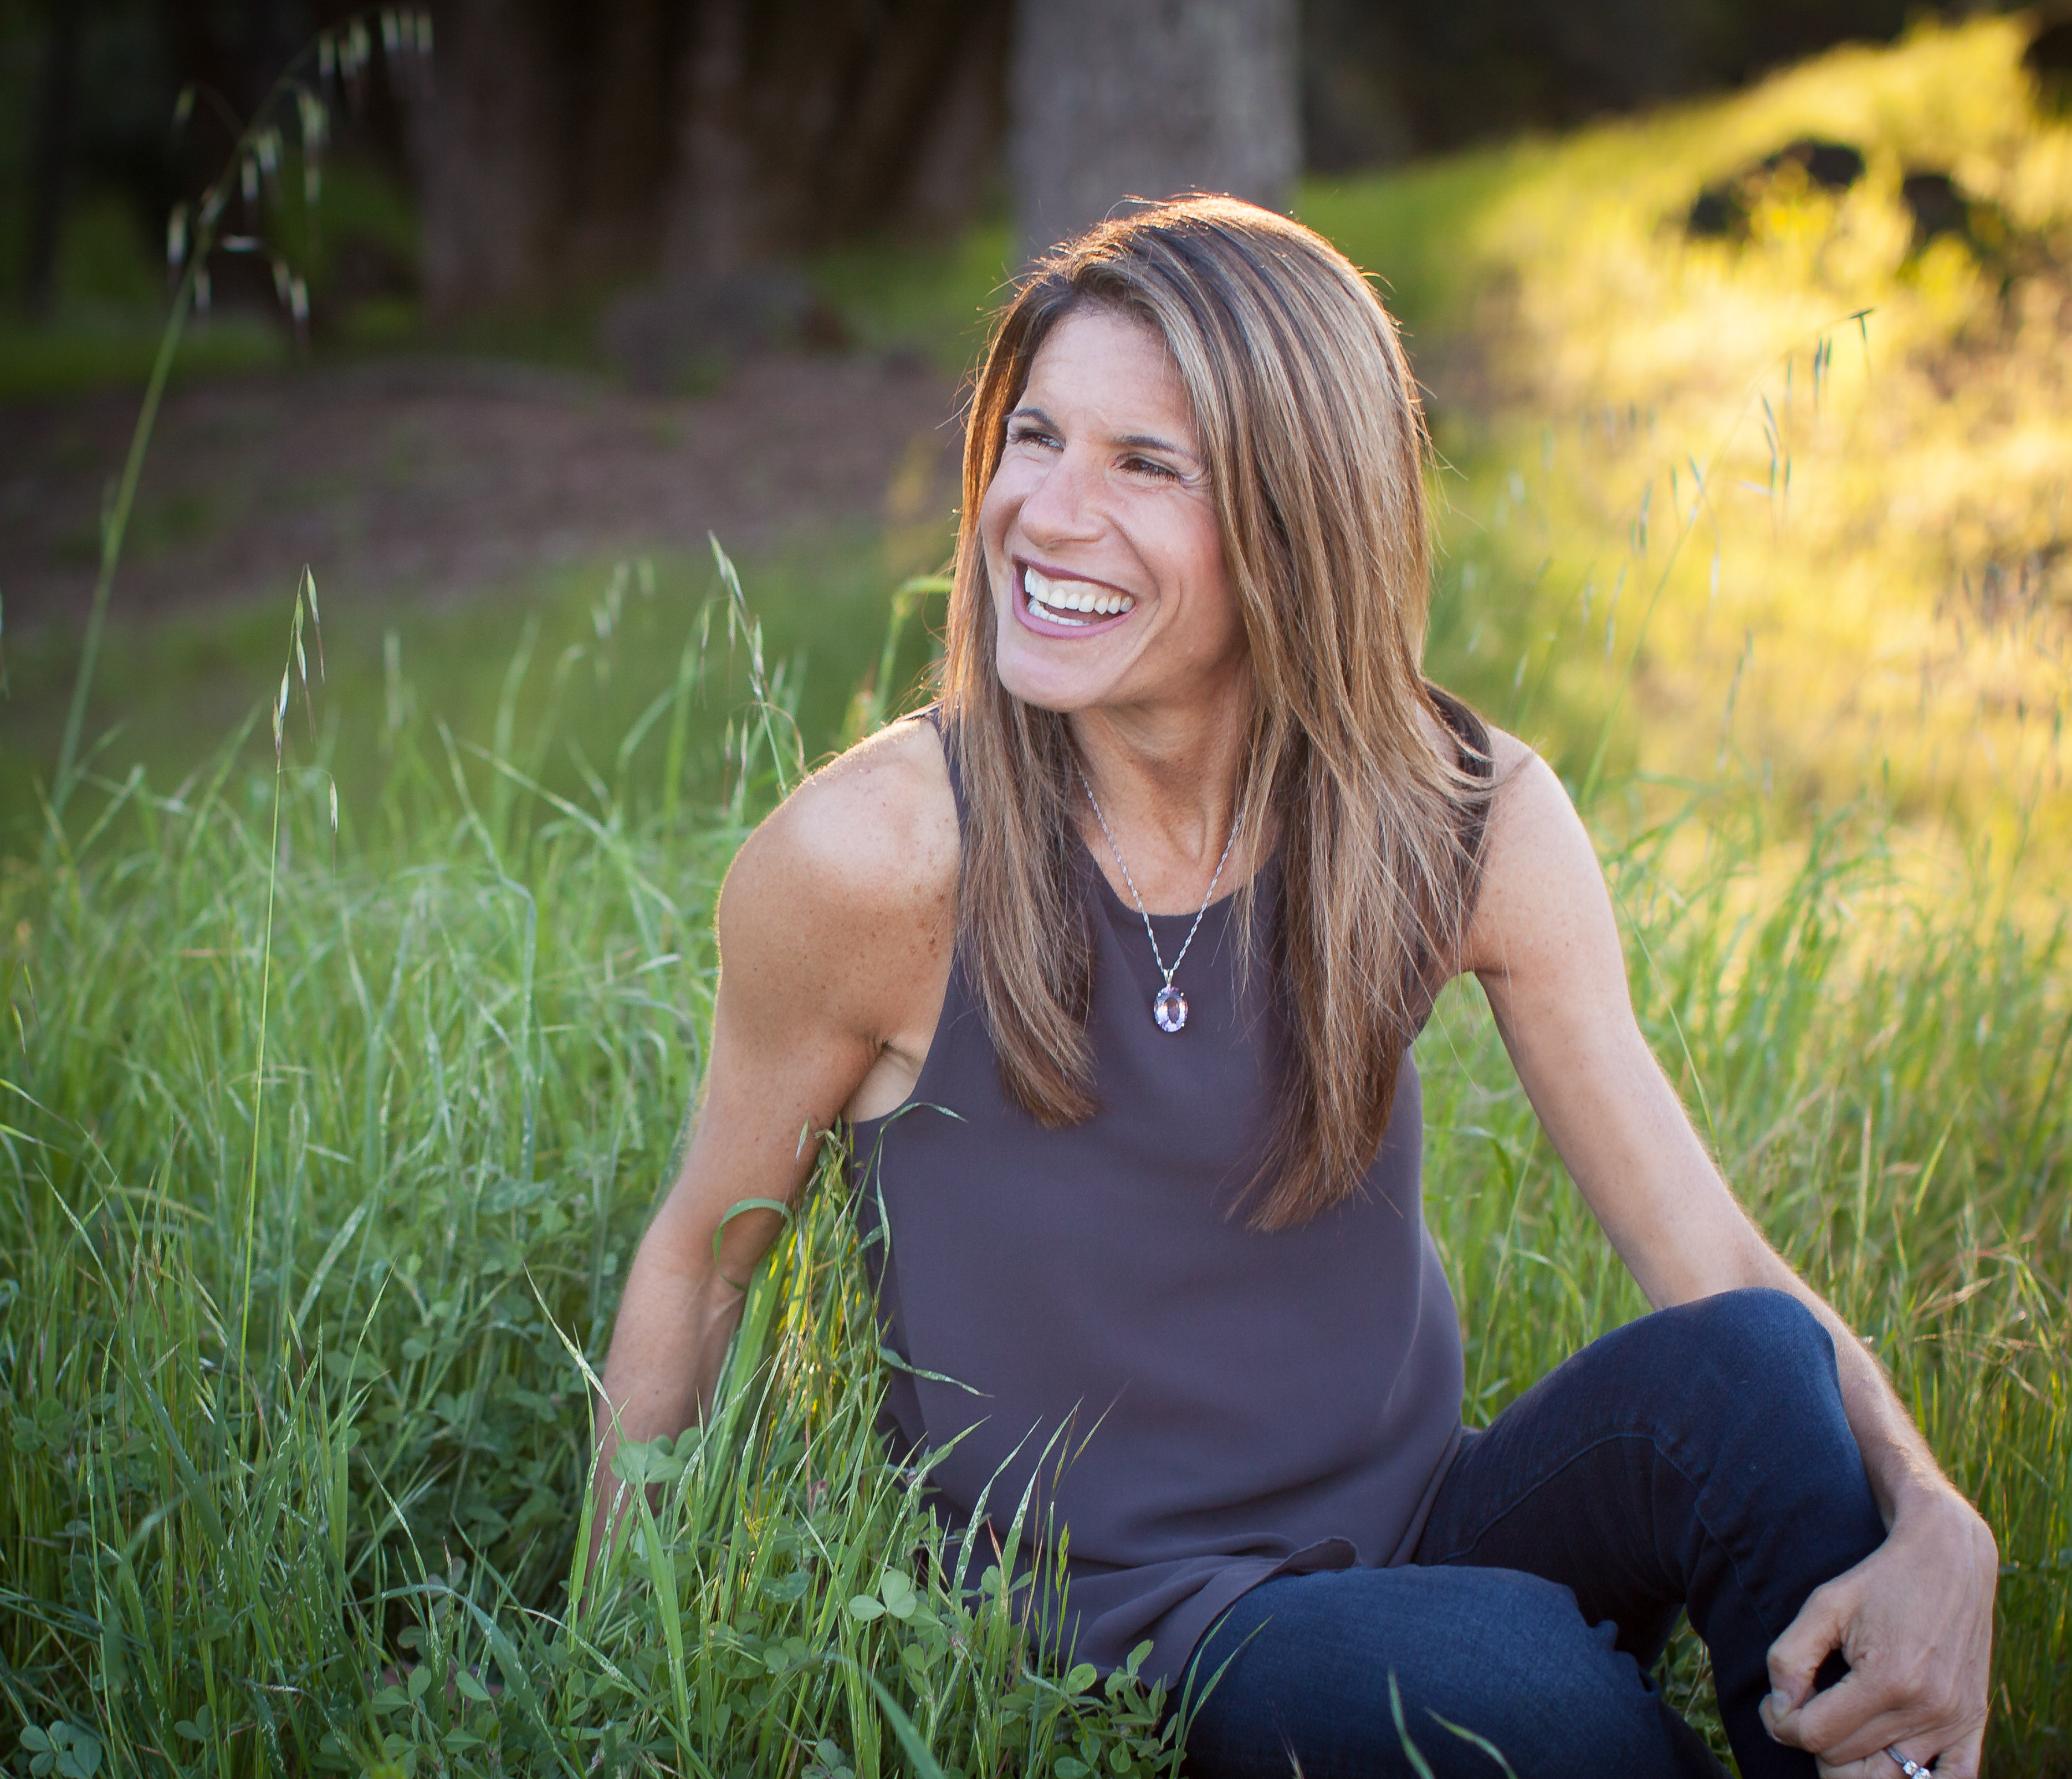 Sheryl O'Loughlin, entrepreneur, CEO, seated in grass with sun, smiling. looking off to the side